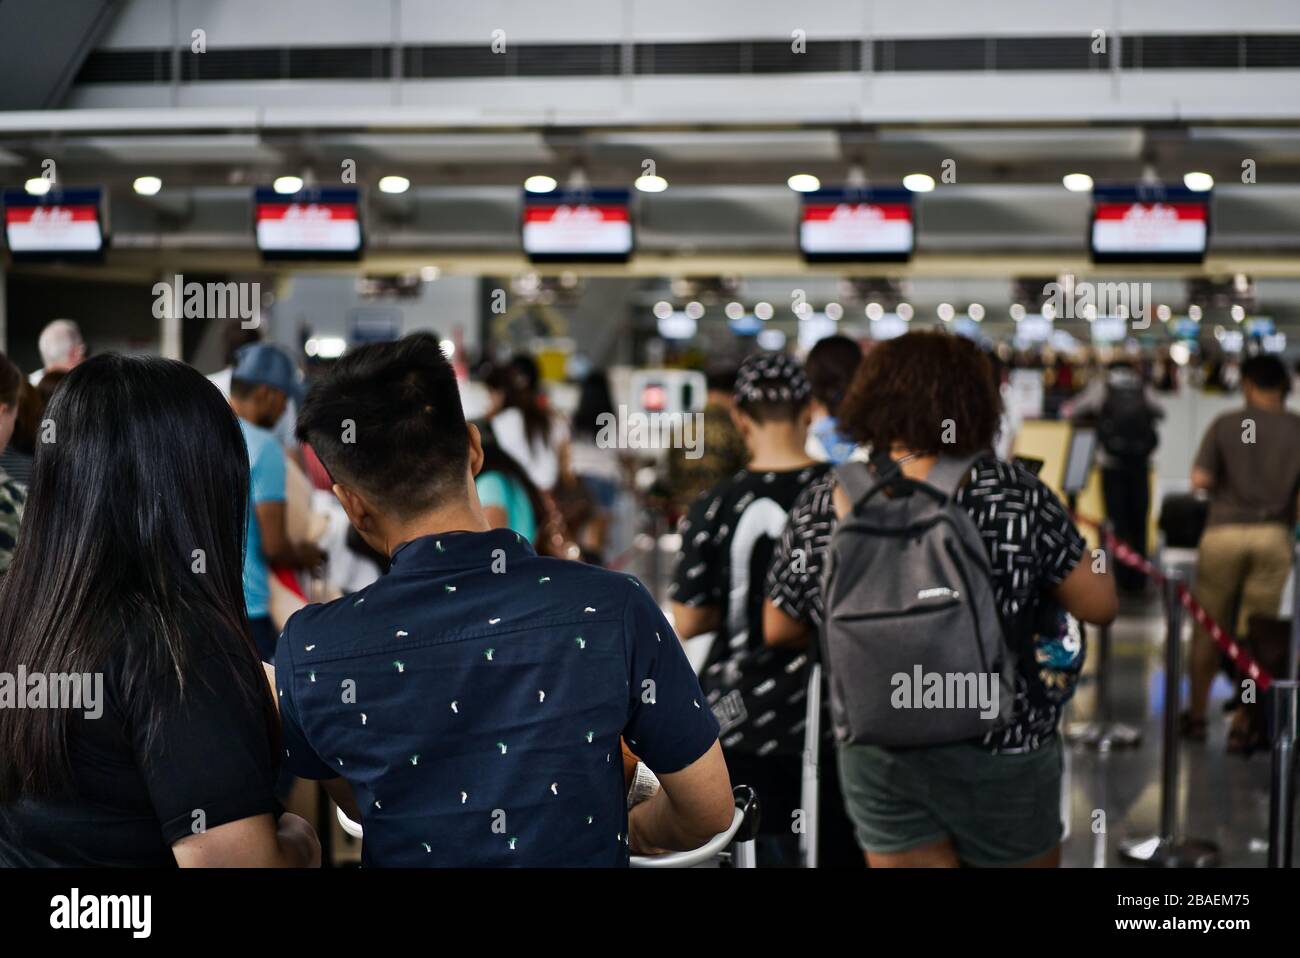 Blurred photo of passengers looking at the flights panel of an airport to confirm the status of their flights. Stock Photo